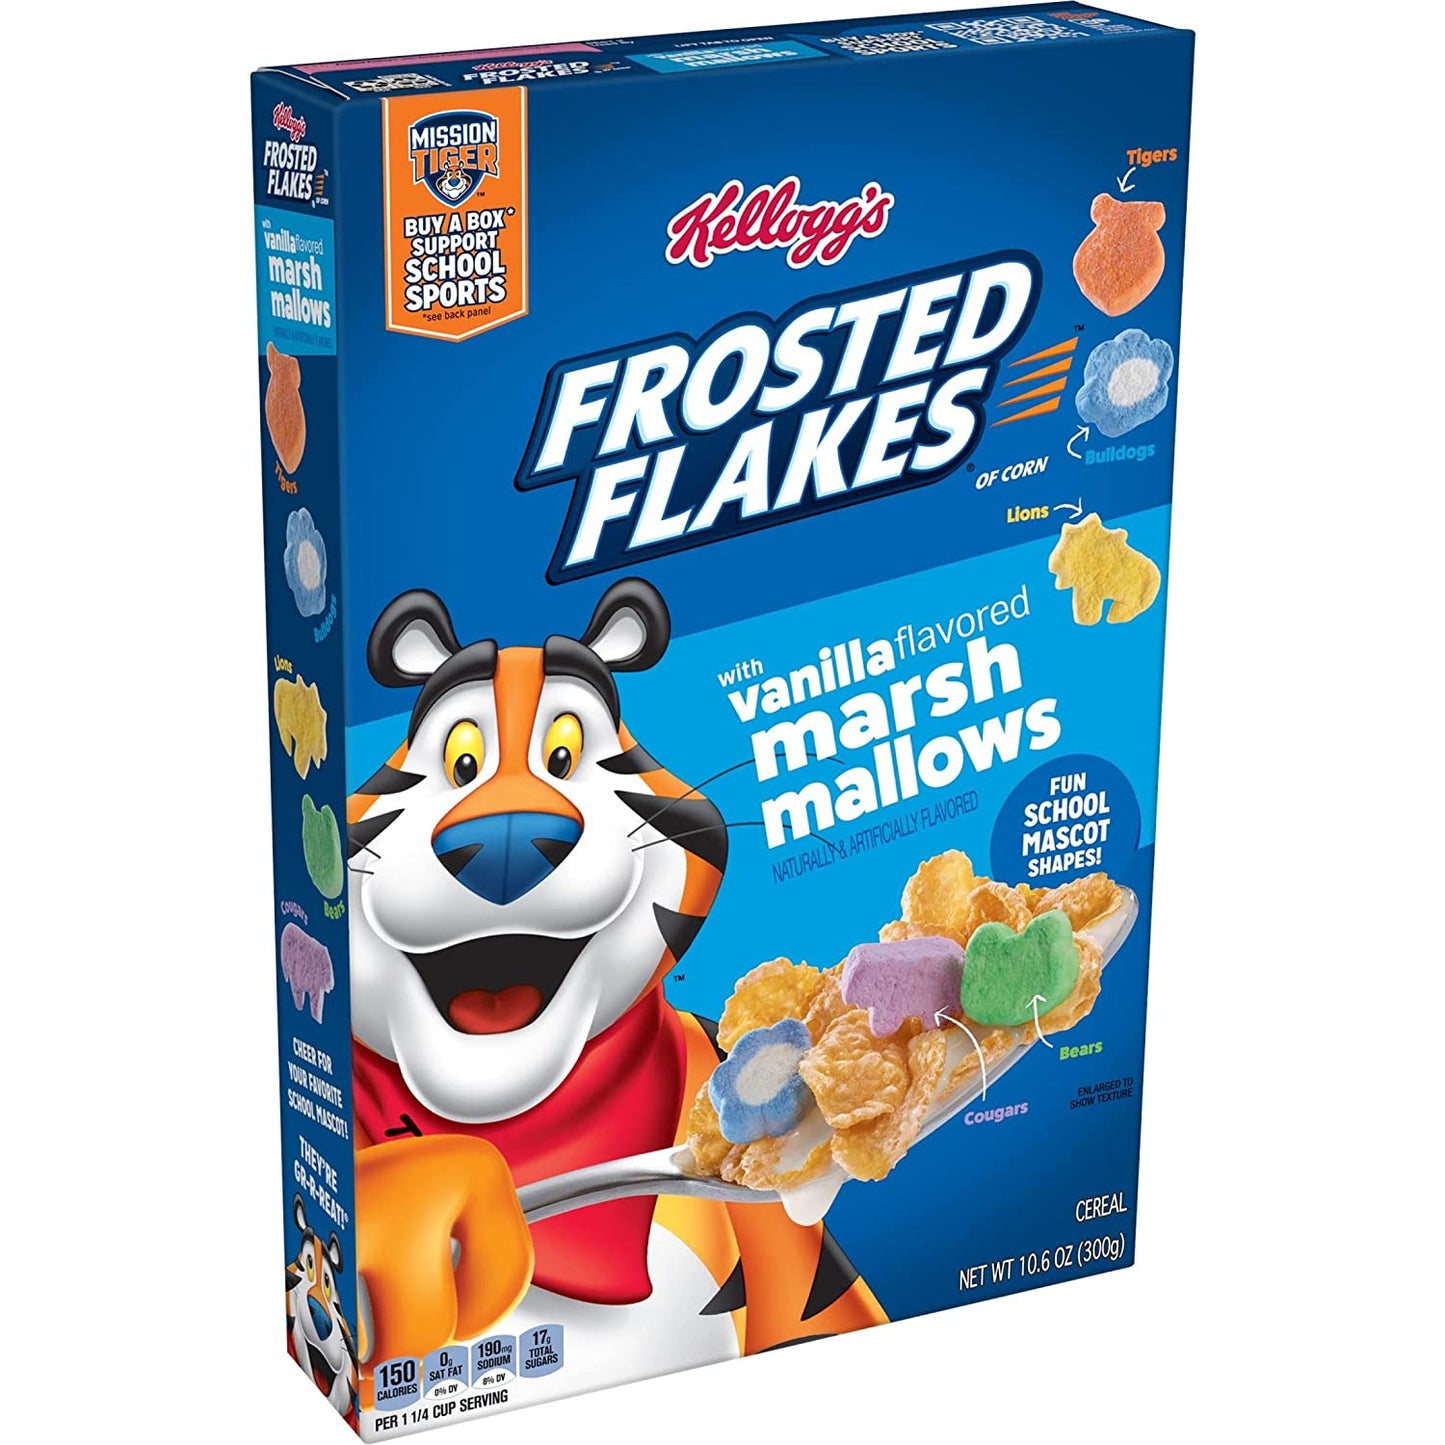 Kellogg's Frosted Flakes Cold Breakfast Cereal, 7 Vitamins and Minerals, Kids Snacks, Original with Vanilla Flavored Marshmallows (10 Boxes) Wholesale